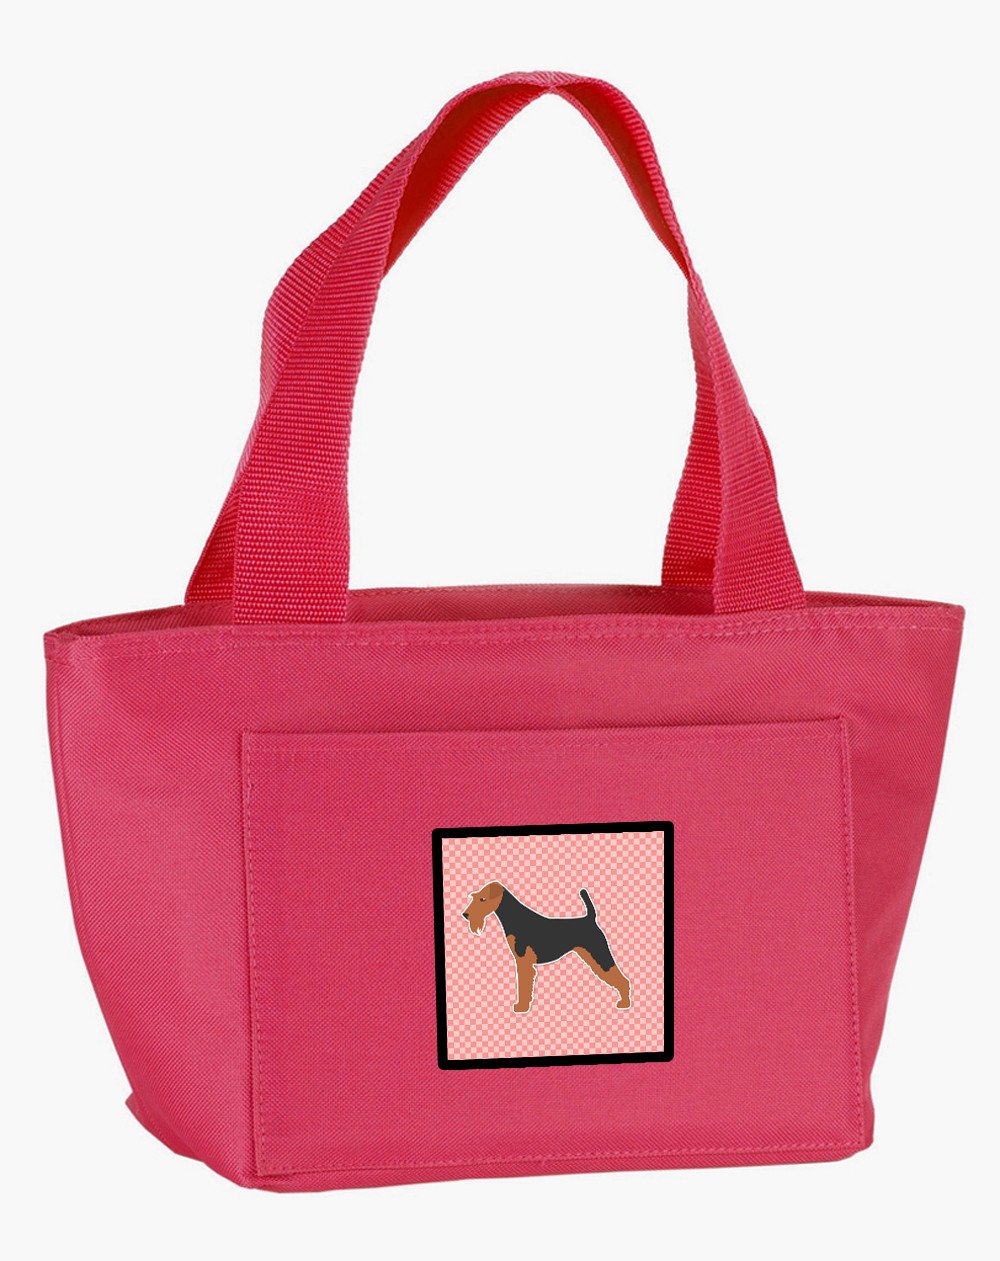 Welsh Terrier Checkerboard Pink Lunch Bag BB3585PK-8808 by Caroline's Treasures